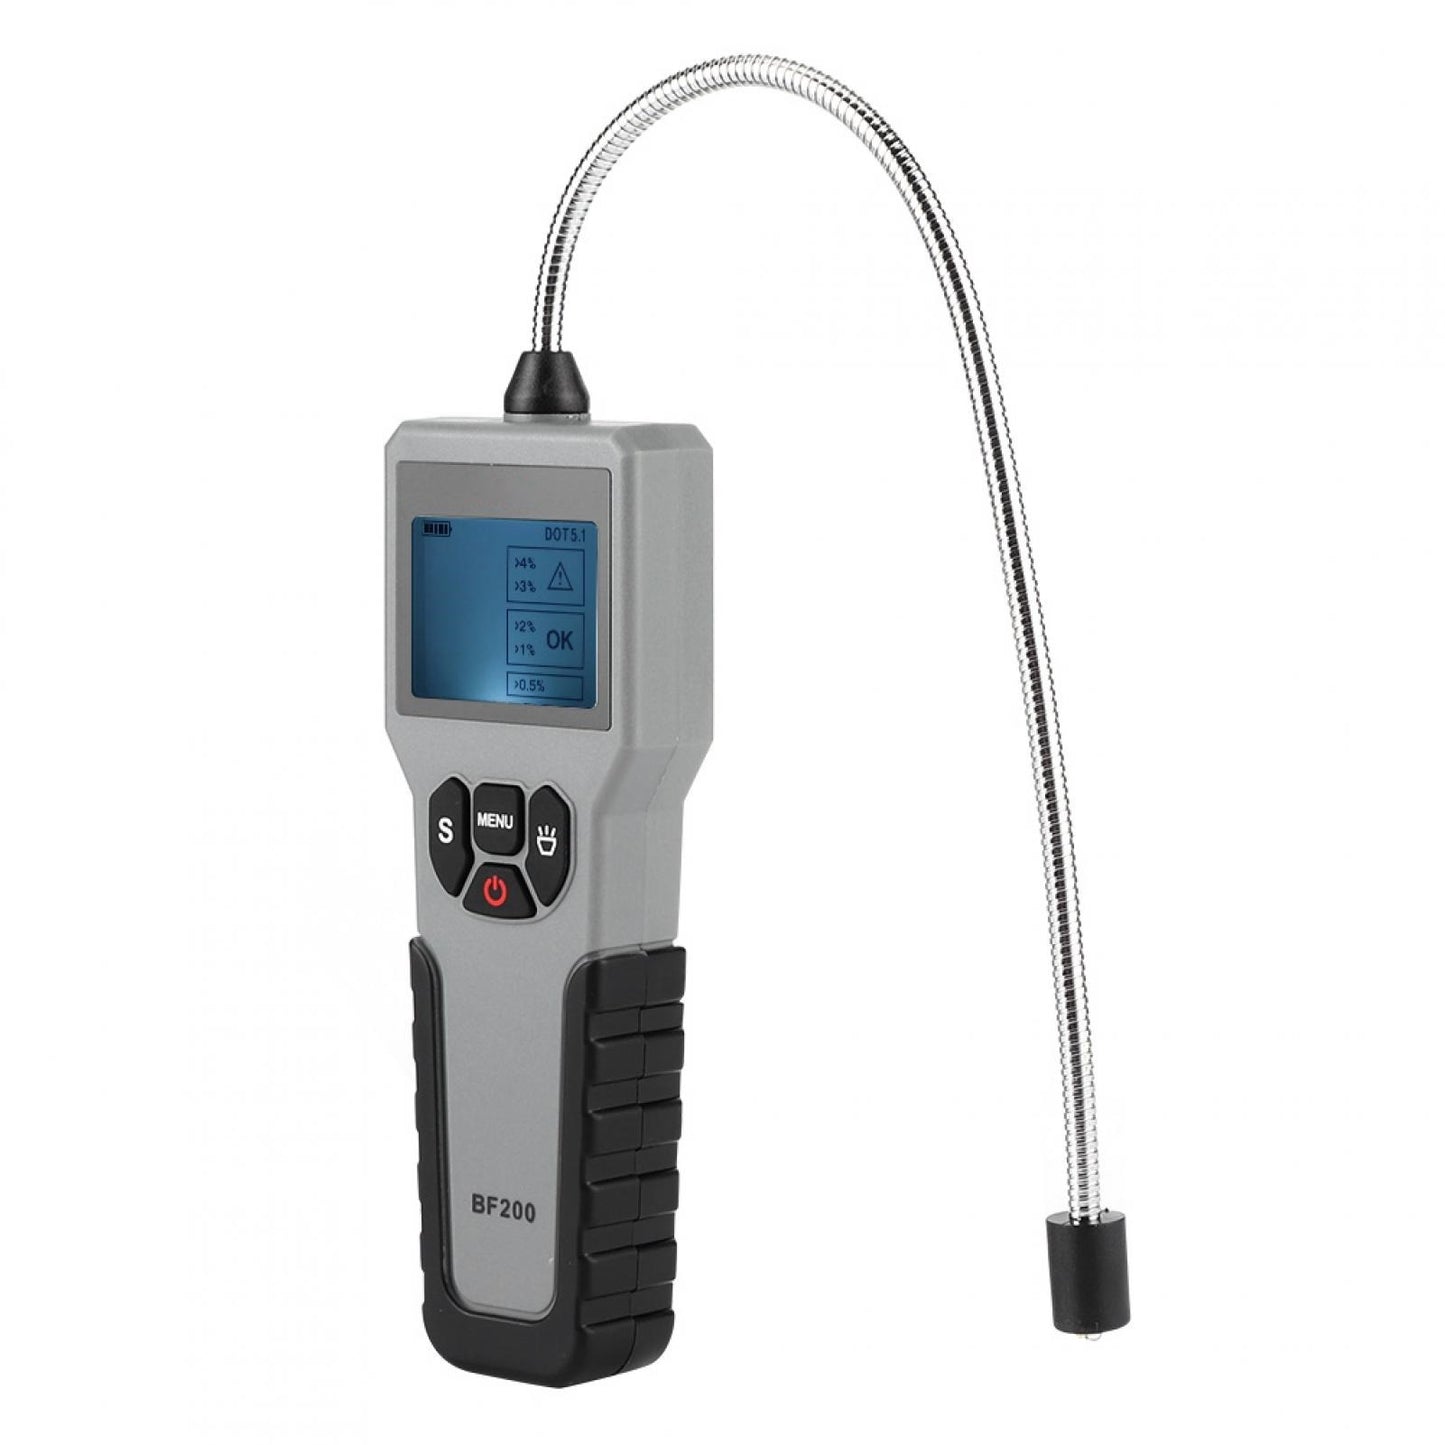 Eagletech BF200 12V Brake Fluid Tester with Flexible Sensor Probe, and Built-In LED Display Support DOT3, DOT4, and DOT5.1 Systems for Quality Test Pen Car Accessories